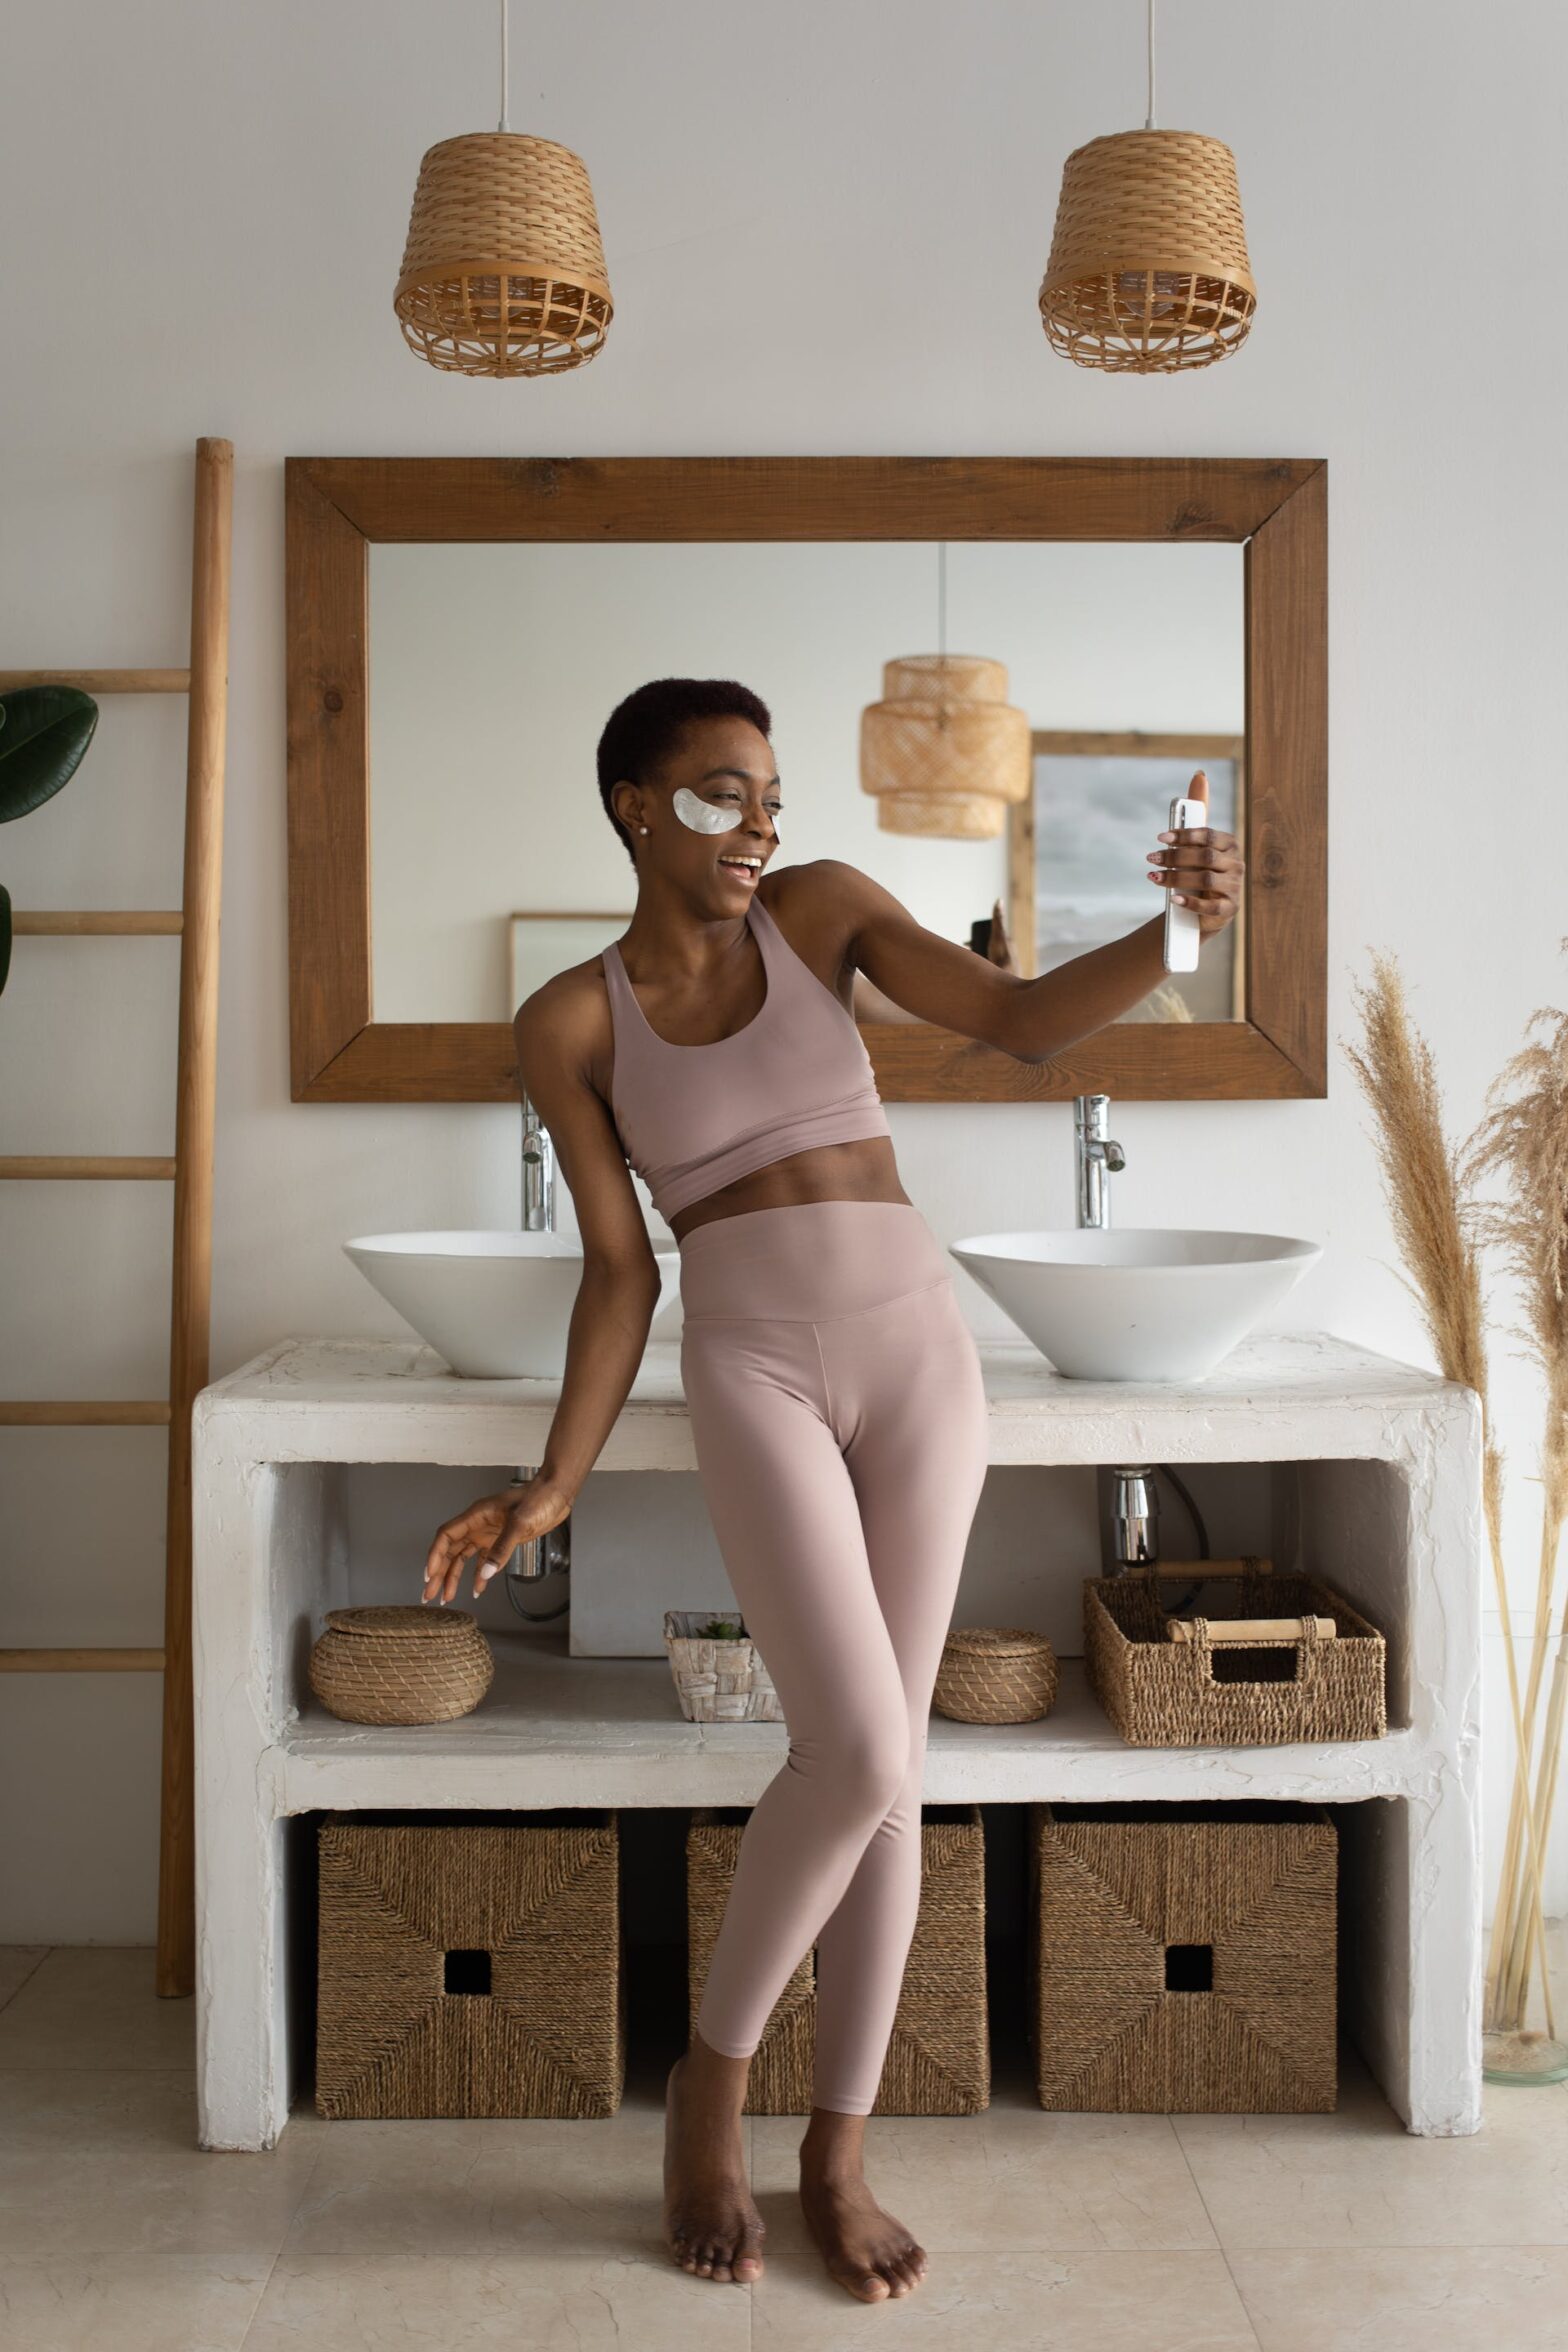 A woman in loungewear standing in front of the mirror